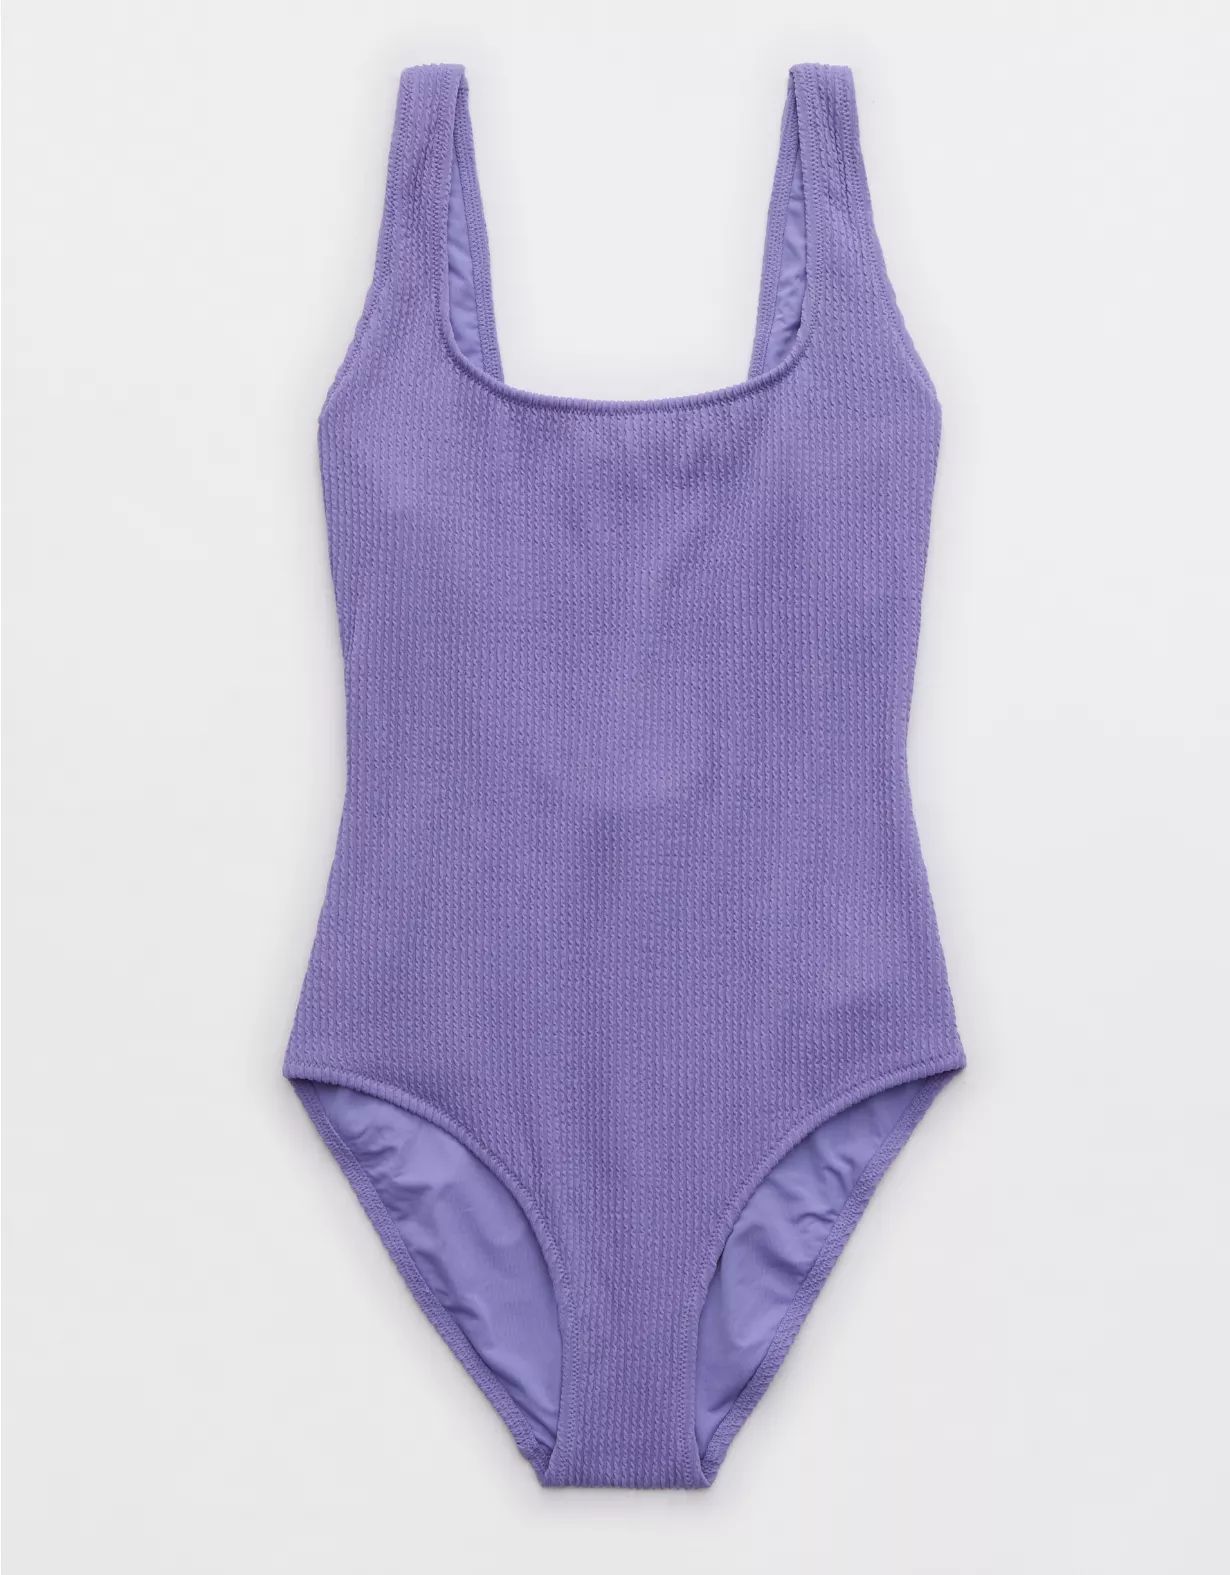 Aerie Crinkle Scoop Full Coverage One Piece Swimsuit | Aerie